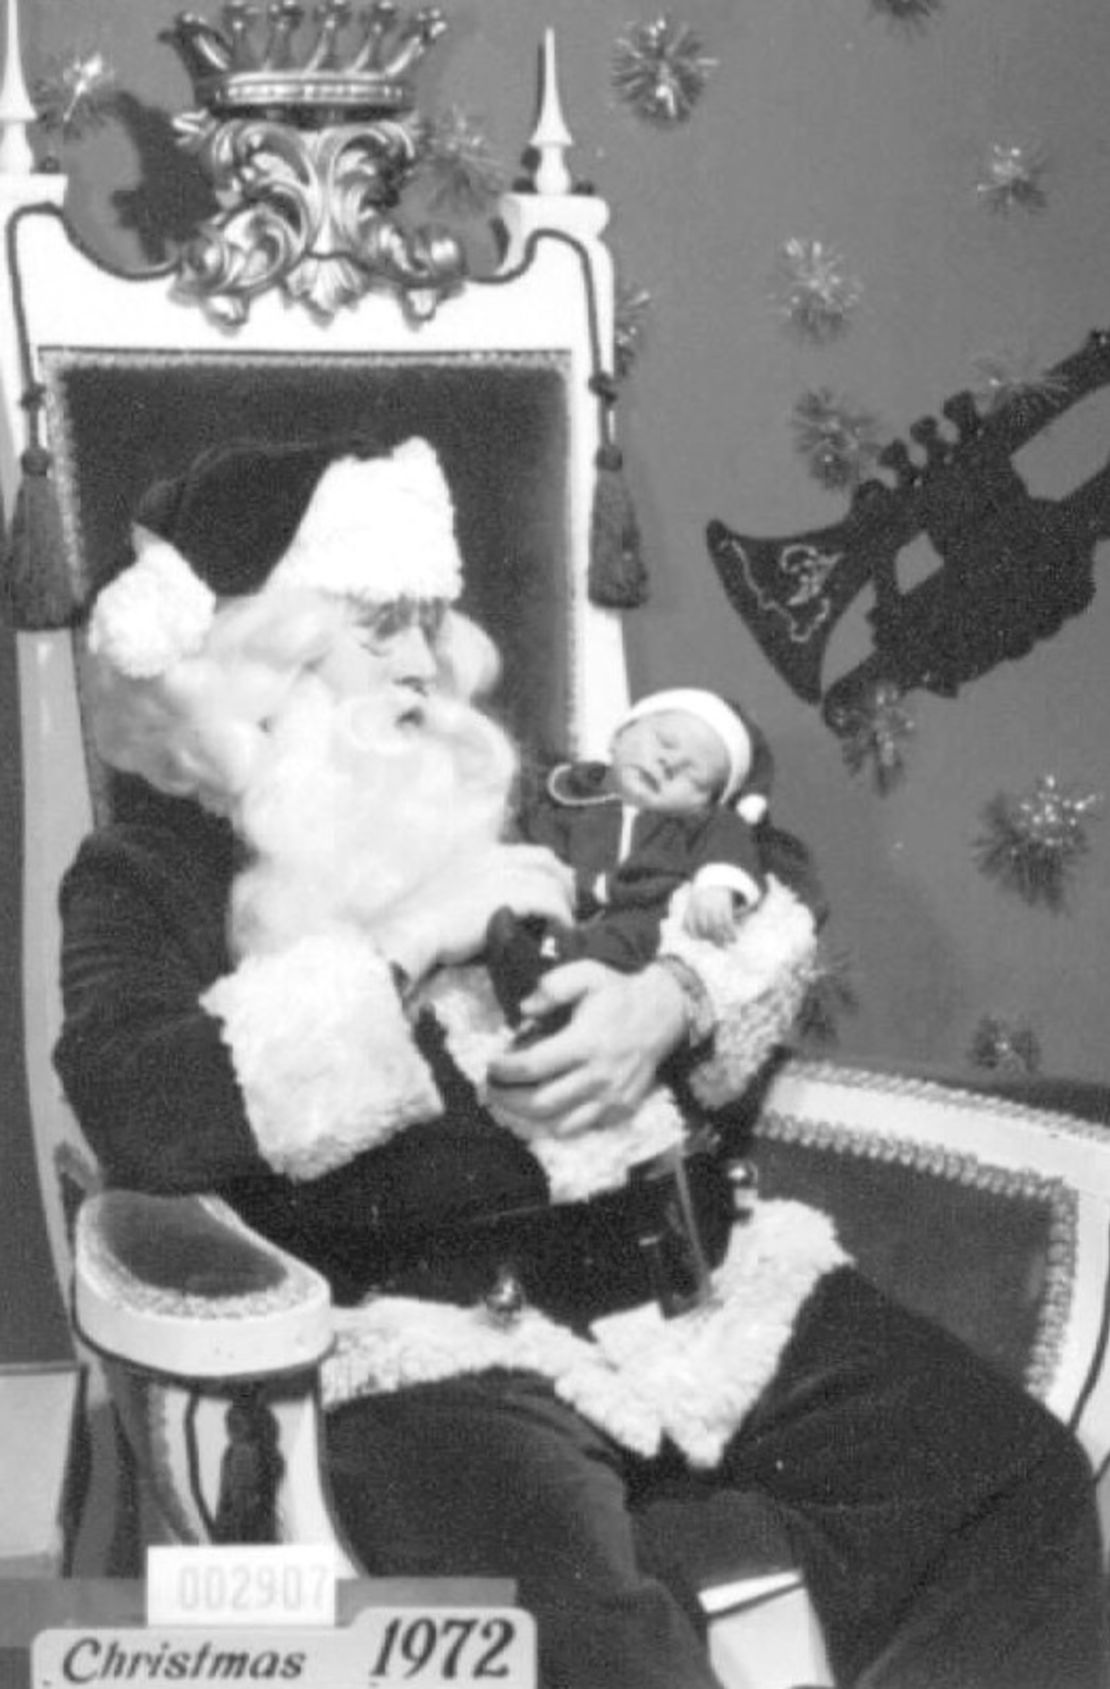 In 1972, Santa Tim, then a college student, posed at Bullock's department store with his brother Marcus, now 39.